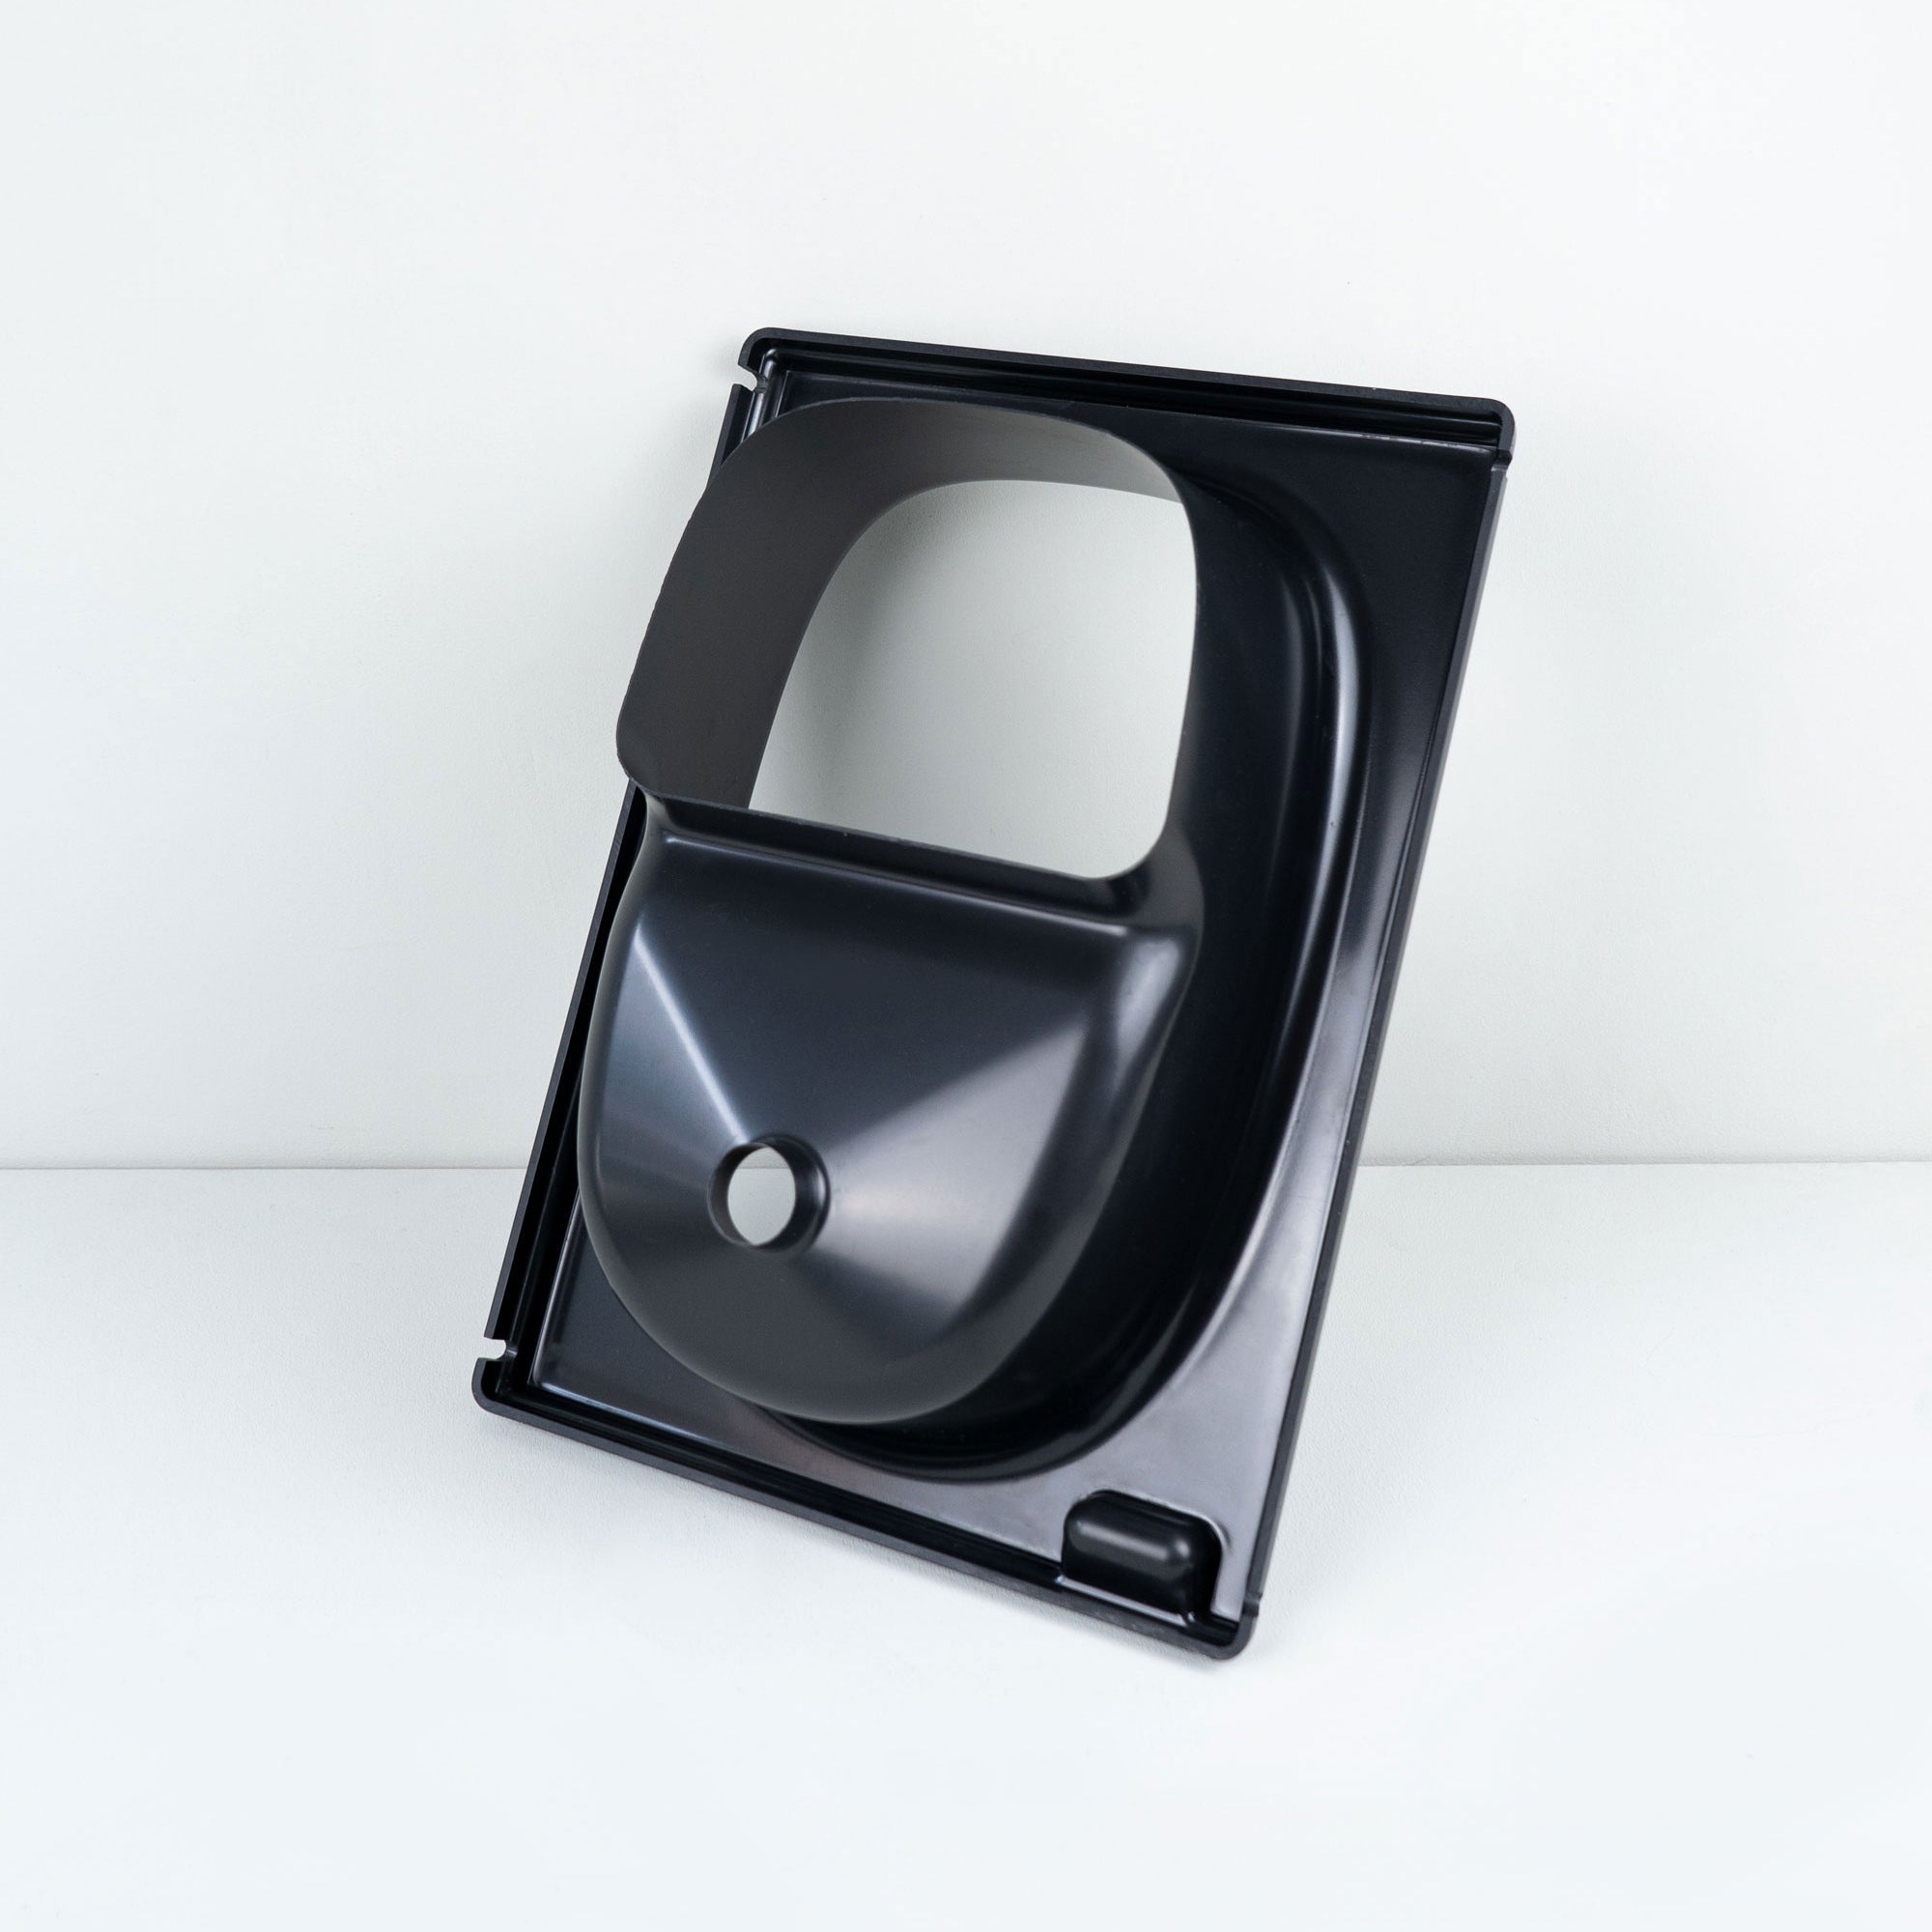 Divider insert as a spare part or upgrade to the new model for BOXIO - TOILET